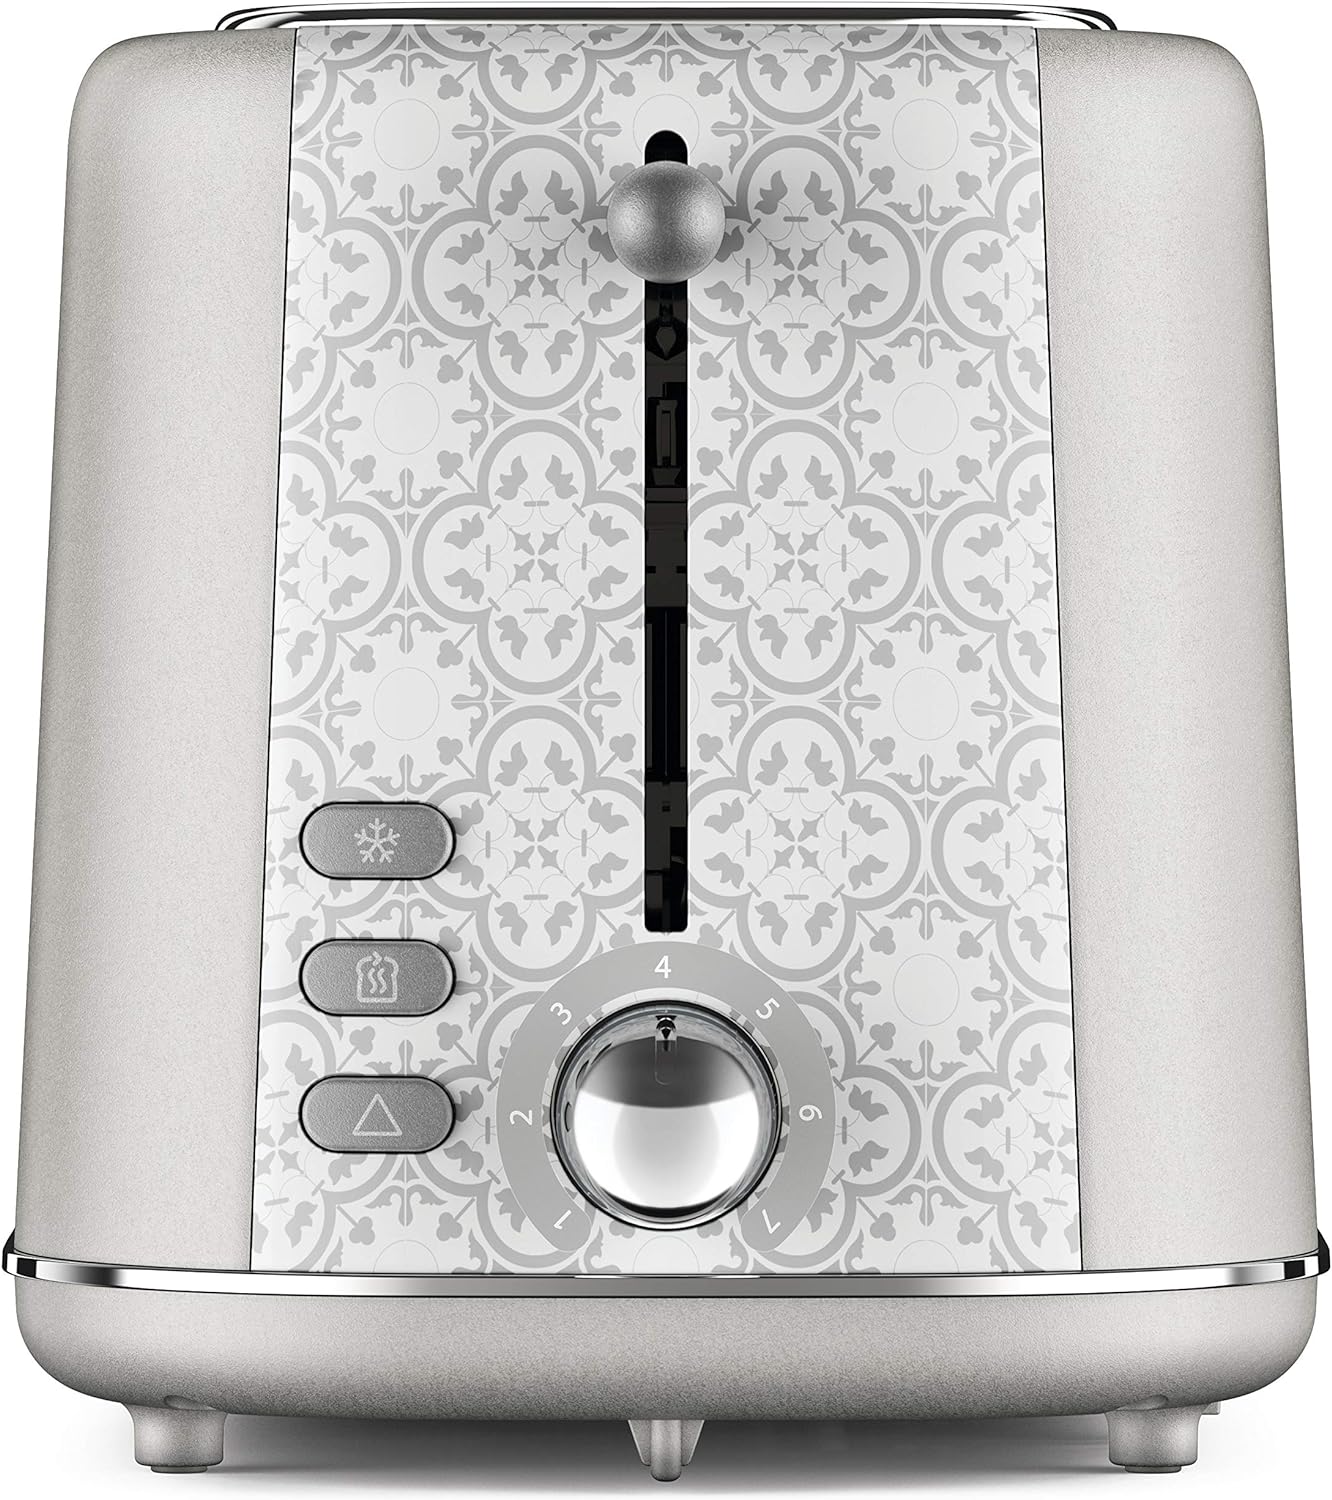 Kenwood Abbey Lux Toaster, 2 Slot Toaster, 7 Browning Settings, Reheat, Defrost and Cancel Functions, Pull Crumb Tray, Cord Storage, 800 W, TCP05.C0WH, Pure White